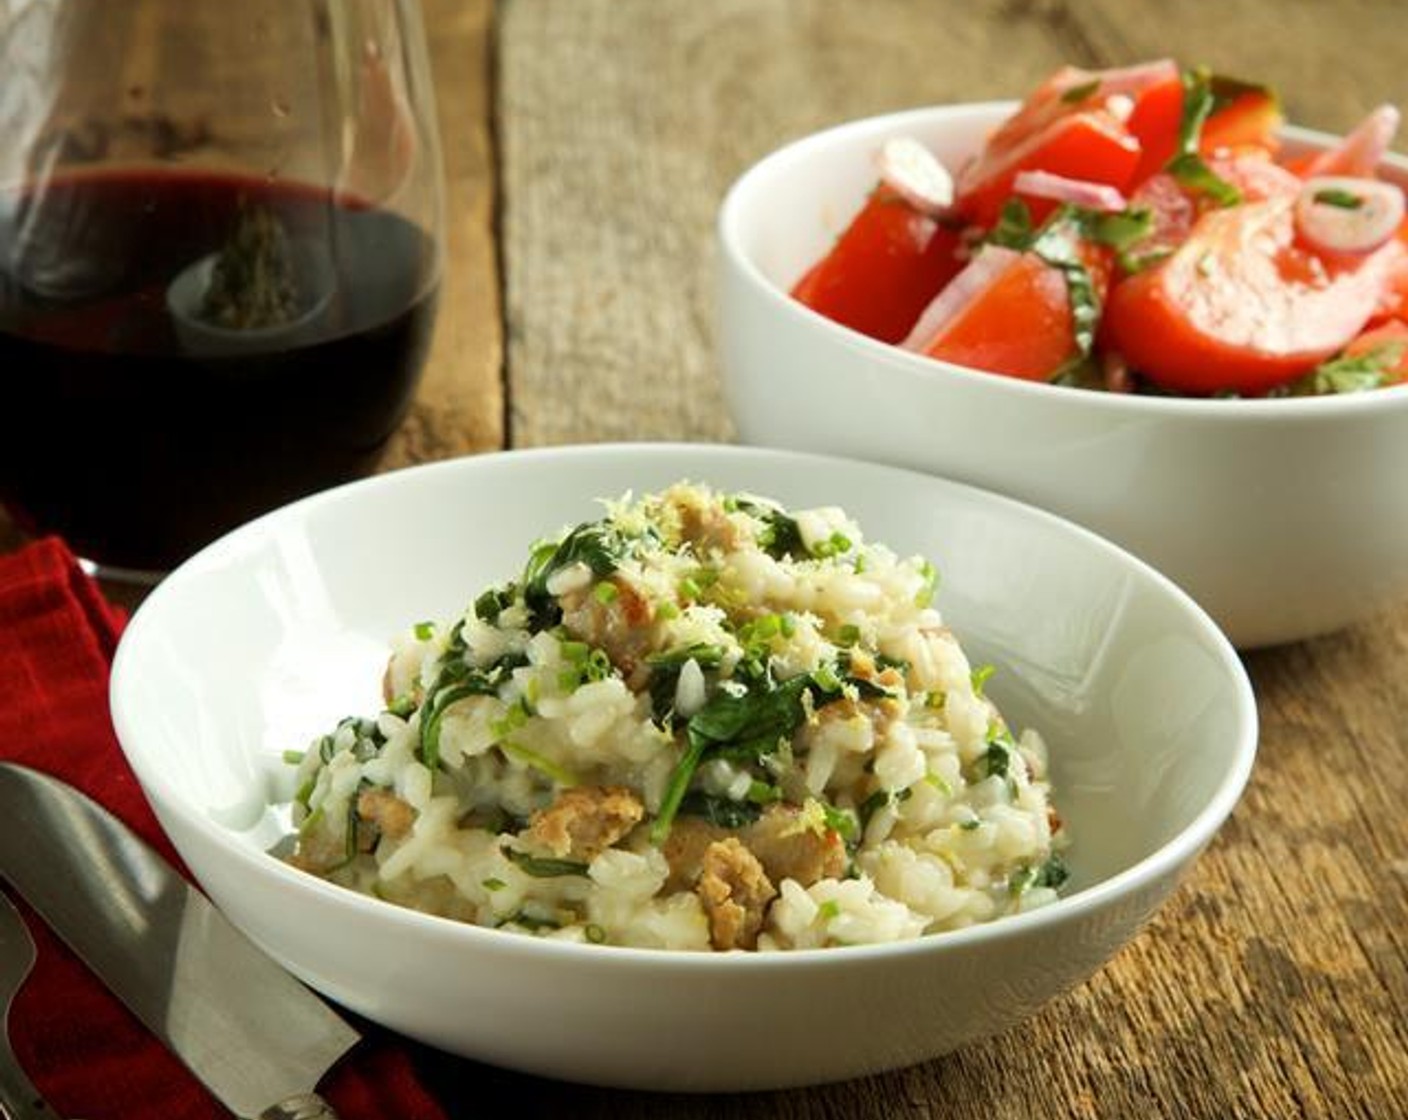 Turkey Sausage and Spinach Risotto, Tomato Salad